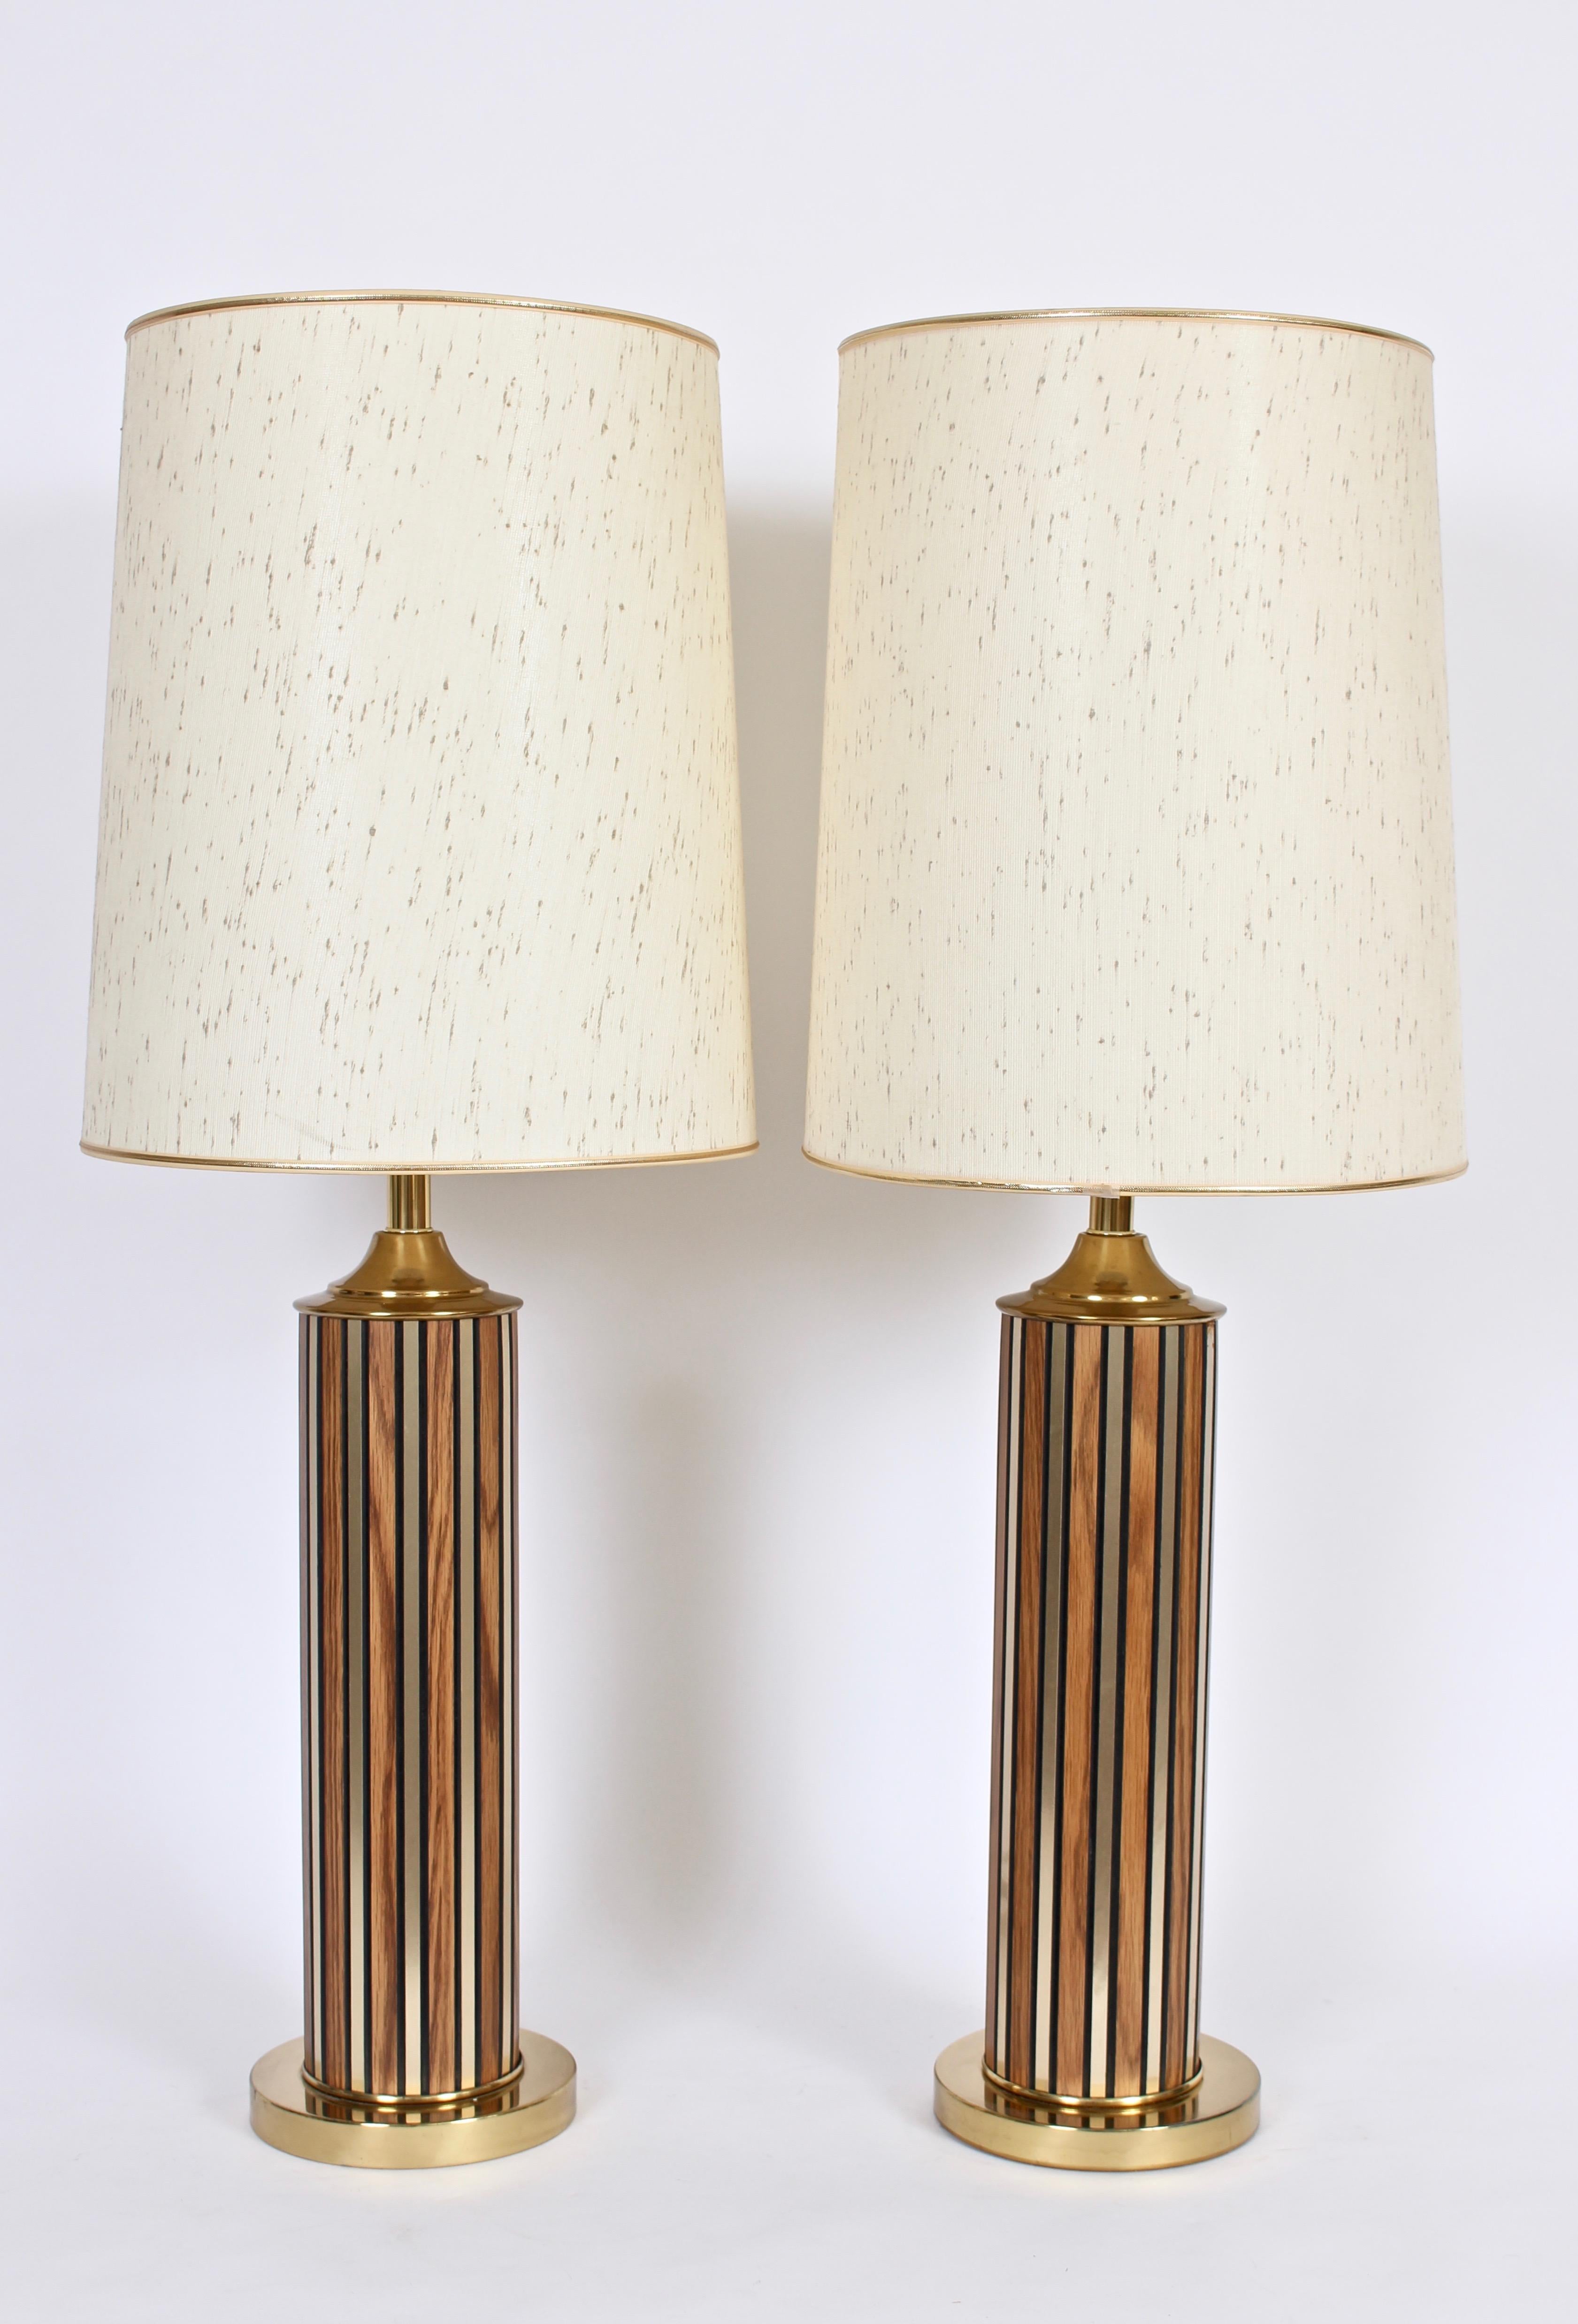 American modern cylinder table lamps with vertical striping in brass and walnut. Featuring a pillar form with fluctuating rectangular vertical strips in grained walnut and brass on a round brass base. Warm. Reflective. Statement lighting. Shade